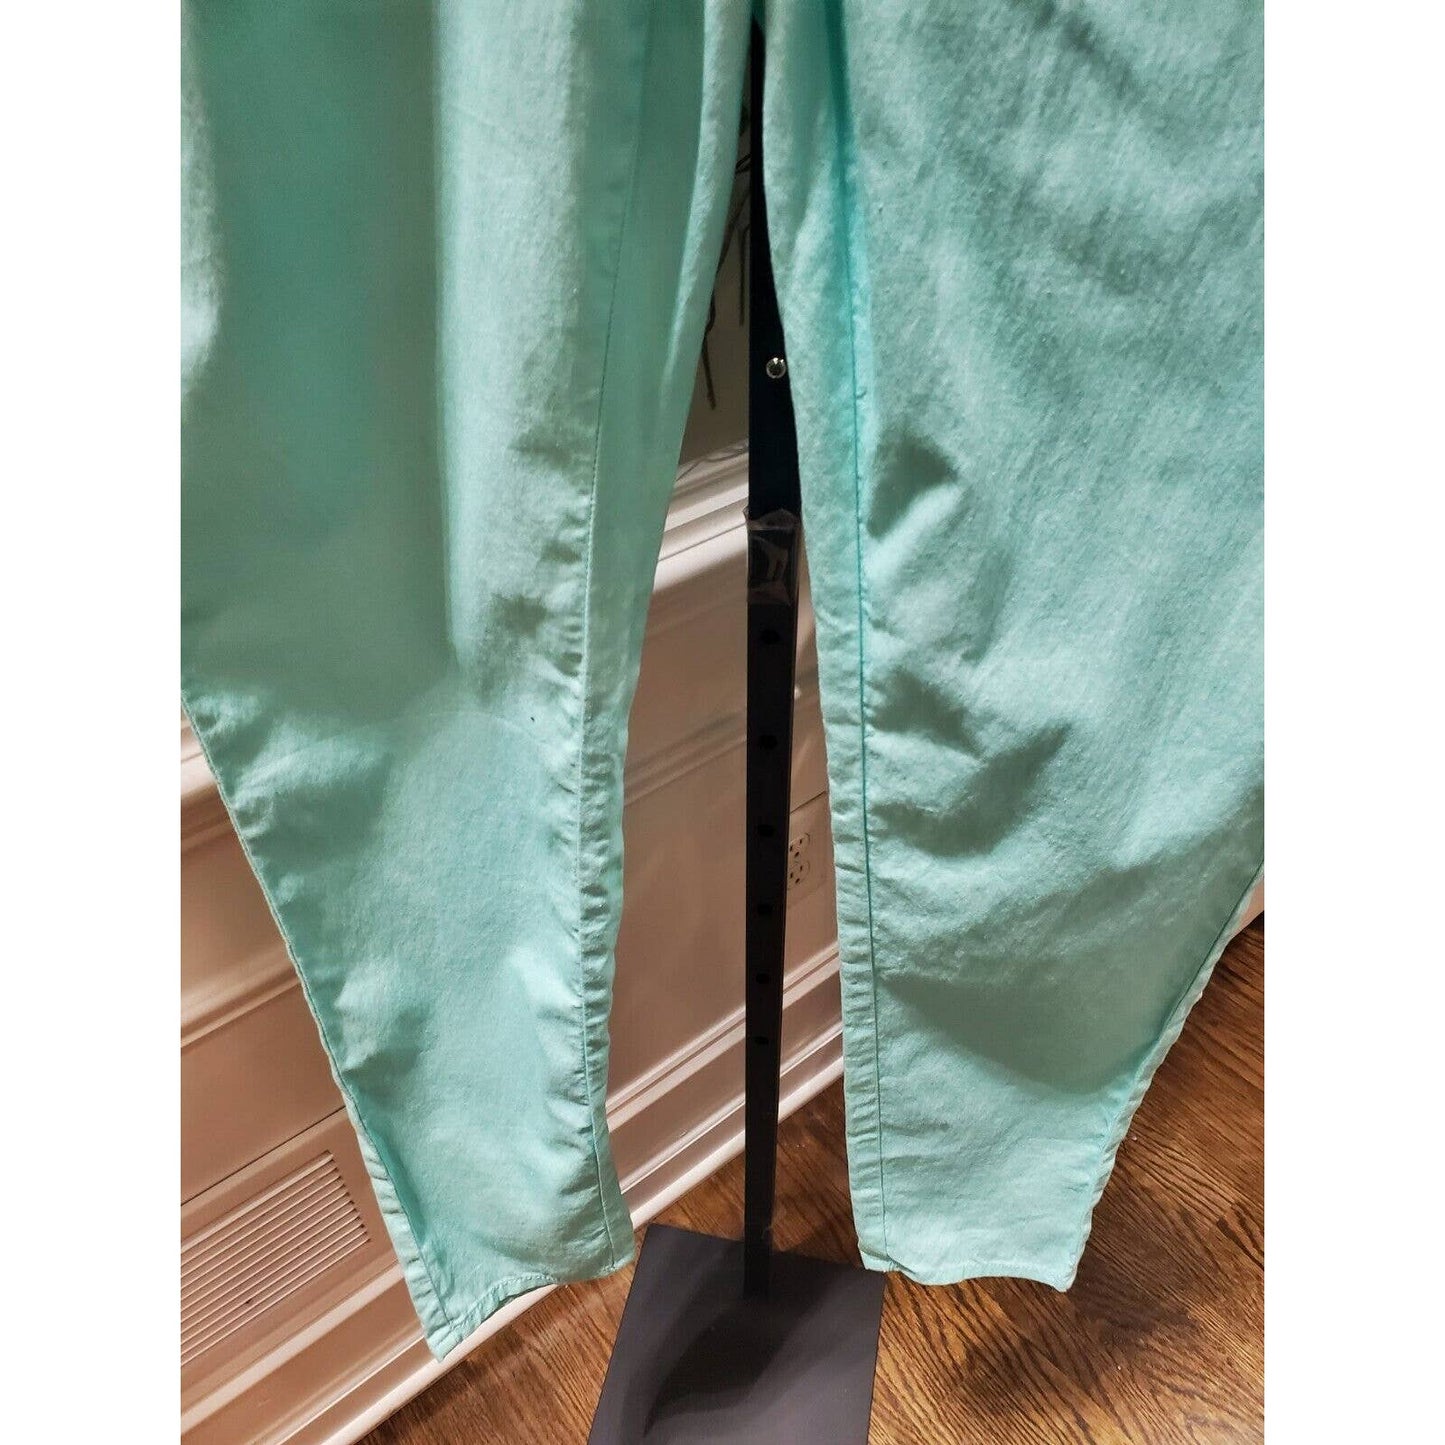 Women's Aqua Cotton & Polyester Mid Rise Pull On Casual Jeggings Pants Large